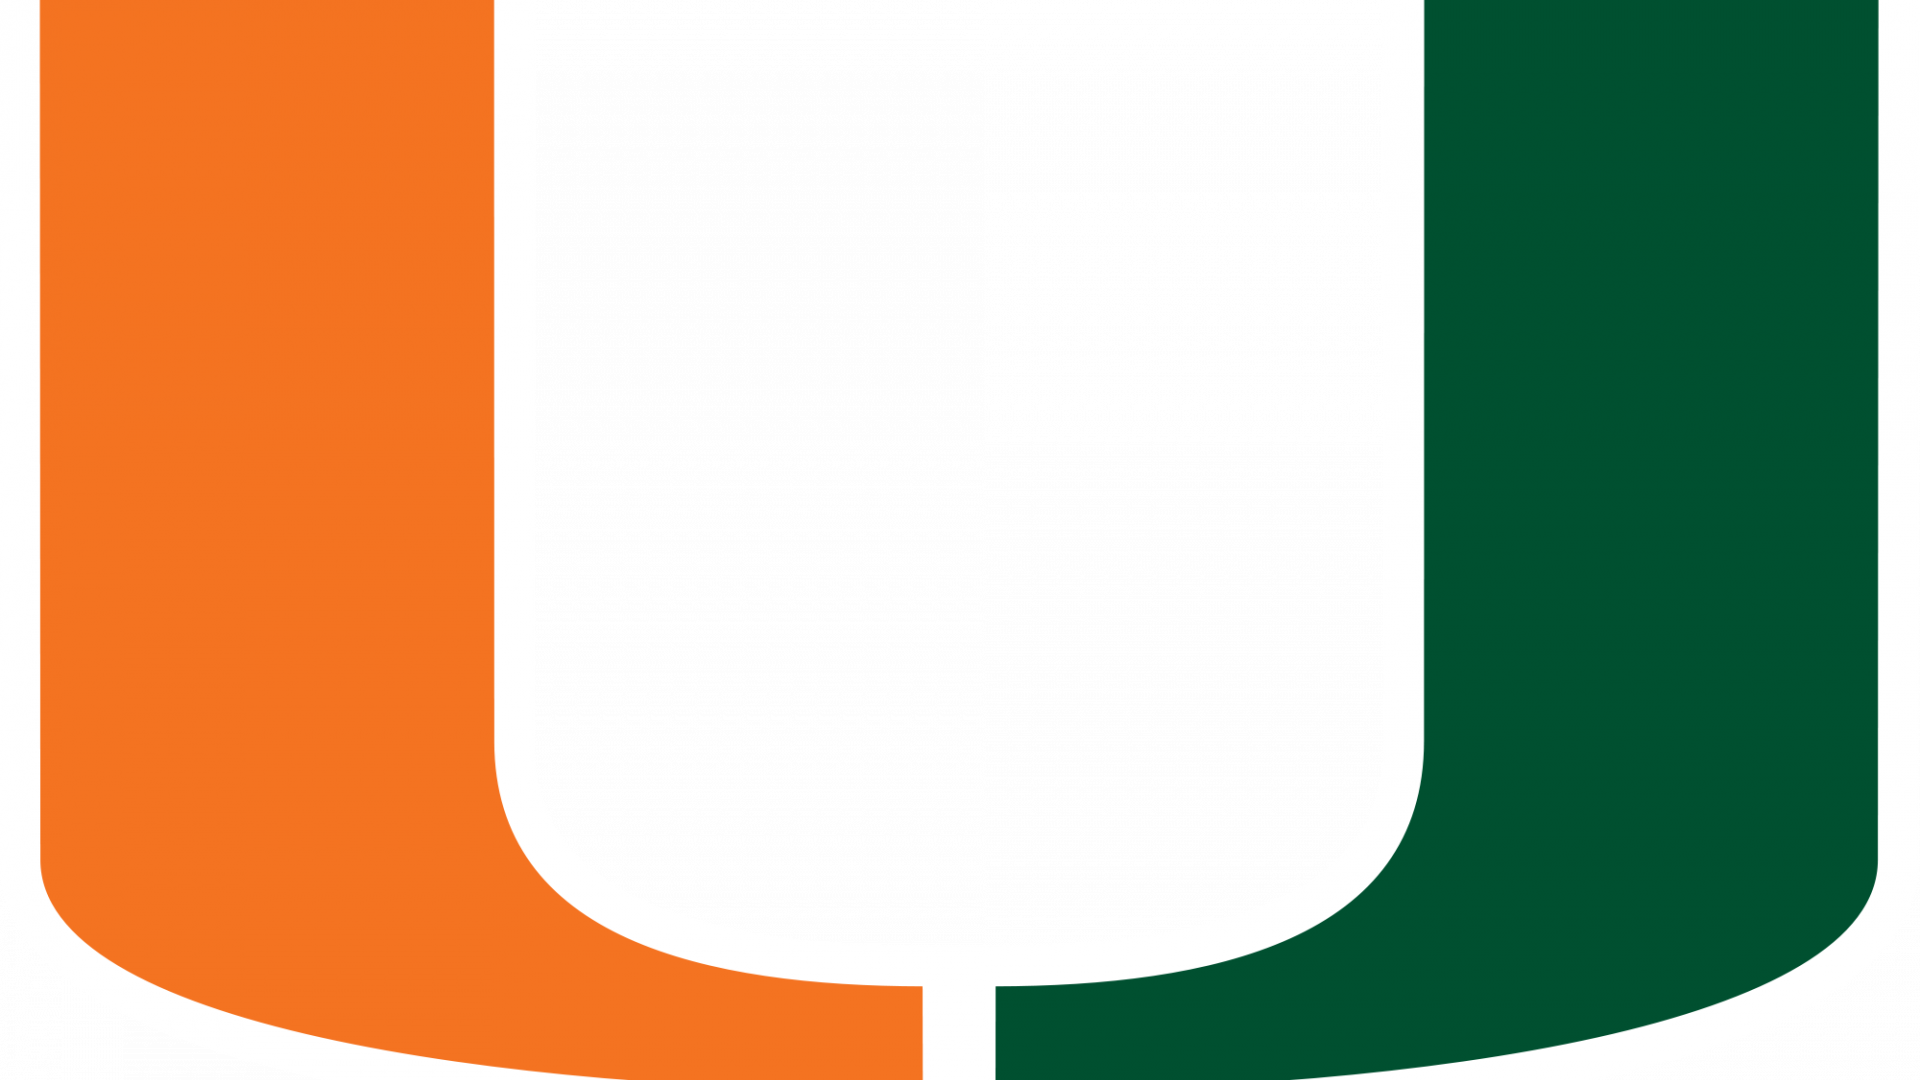 Download university of miami football logo png image with no background